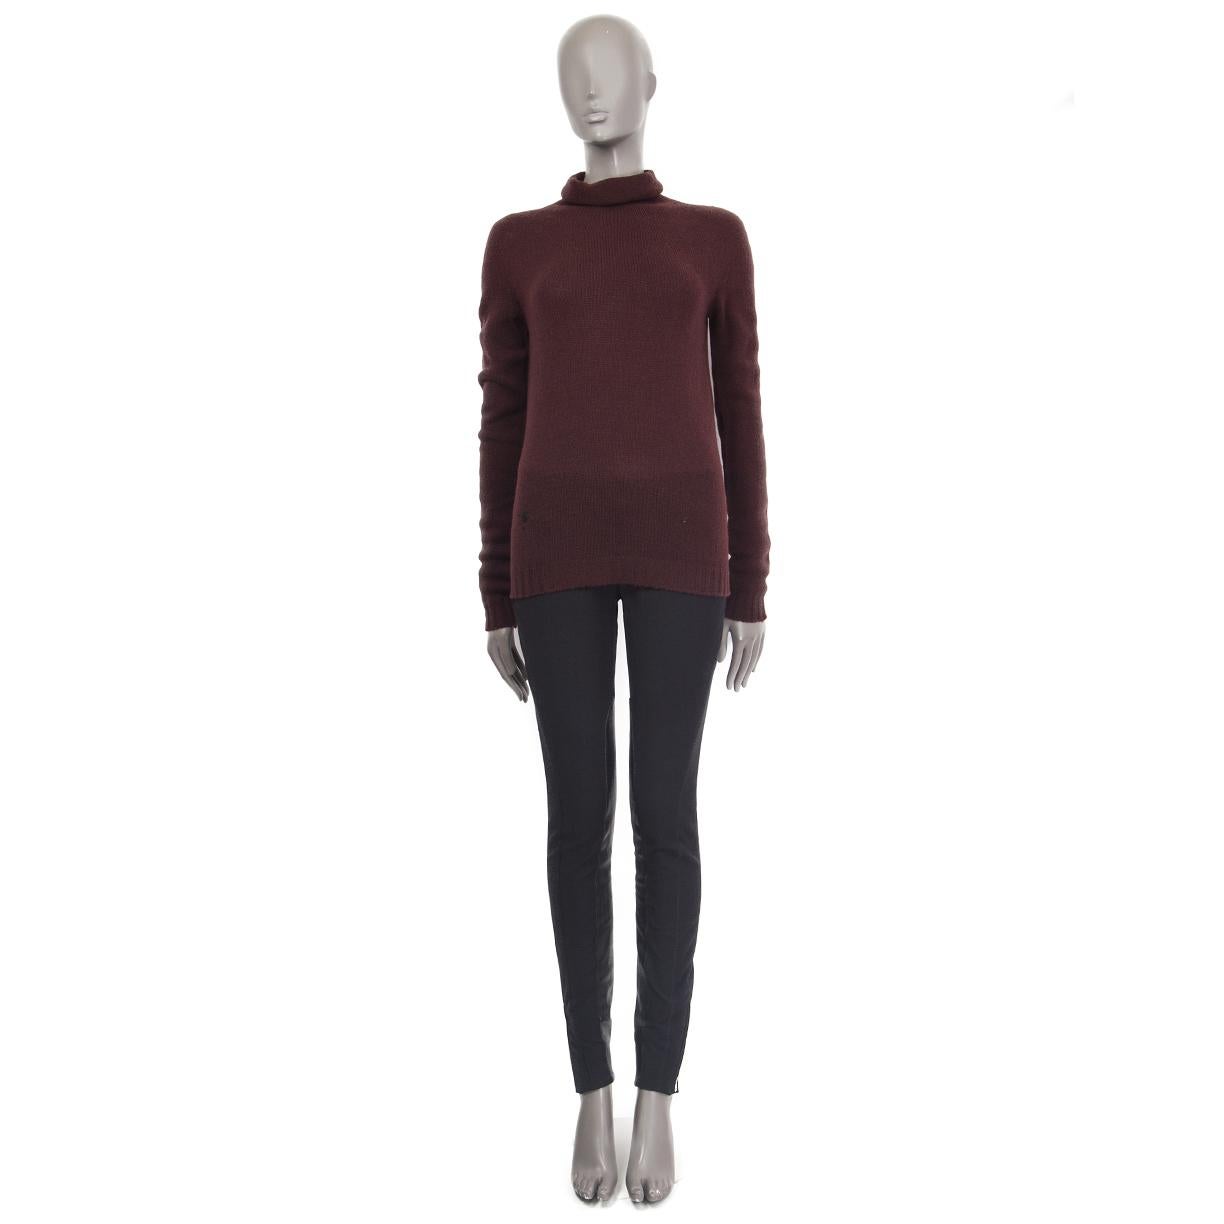 100% authentic Christian Dior turtleneck sweater in chestnut brown cashmere (100%) with raglan sleeves (sleeve measurement taken from the neck). Medium weight. Embroidered CD and bee on the front in black. Has been worn and is in excellent